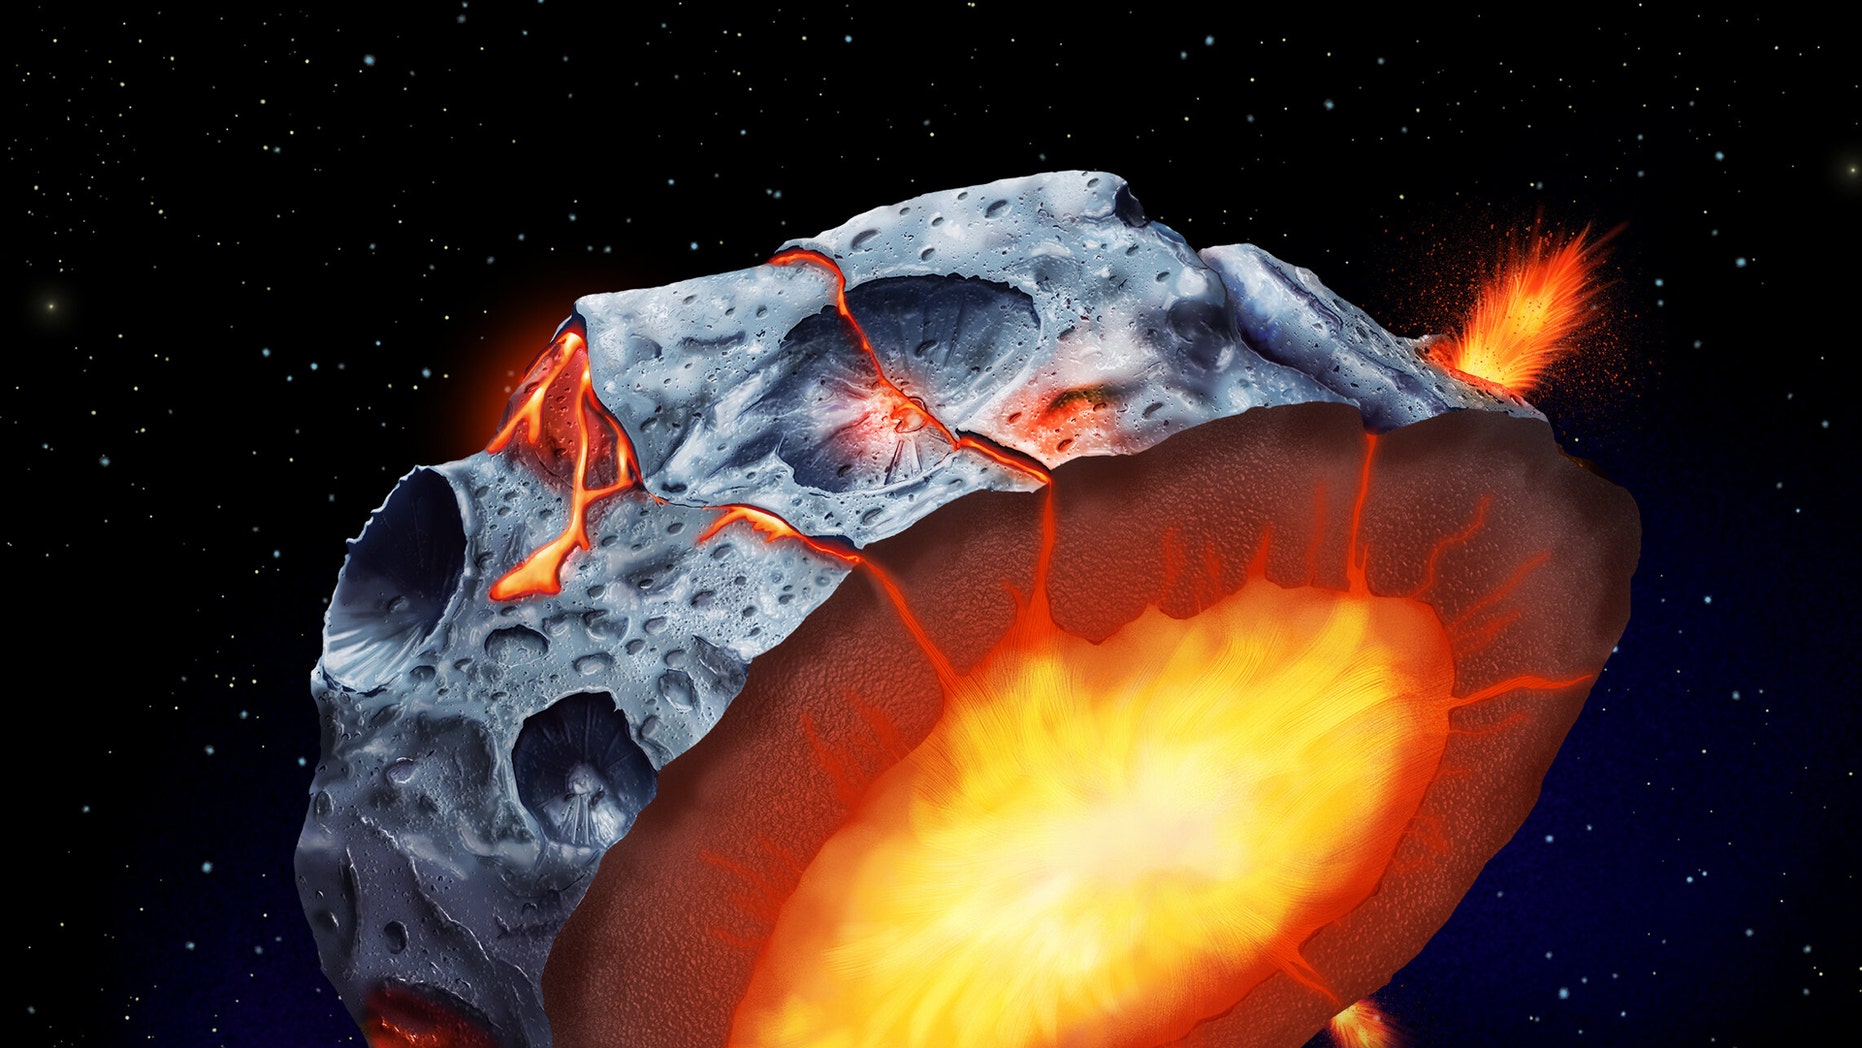 Iron volcanoes may have erupted on metal asteroids, study says | Fox News1862 x 1048